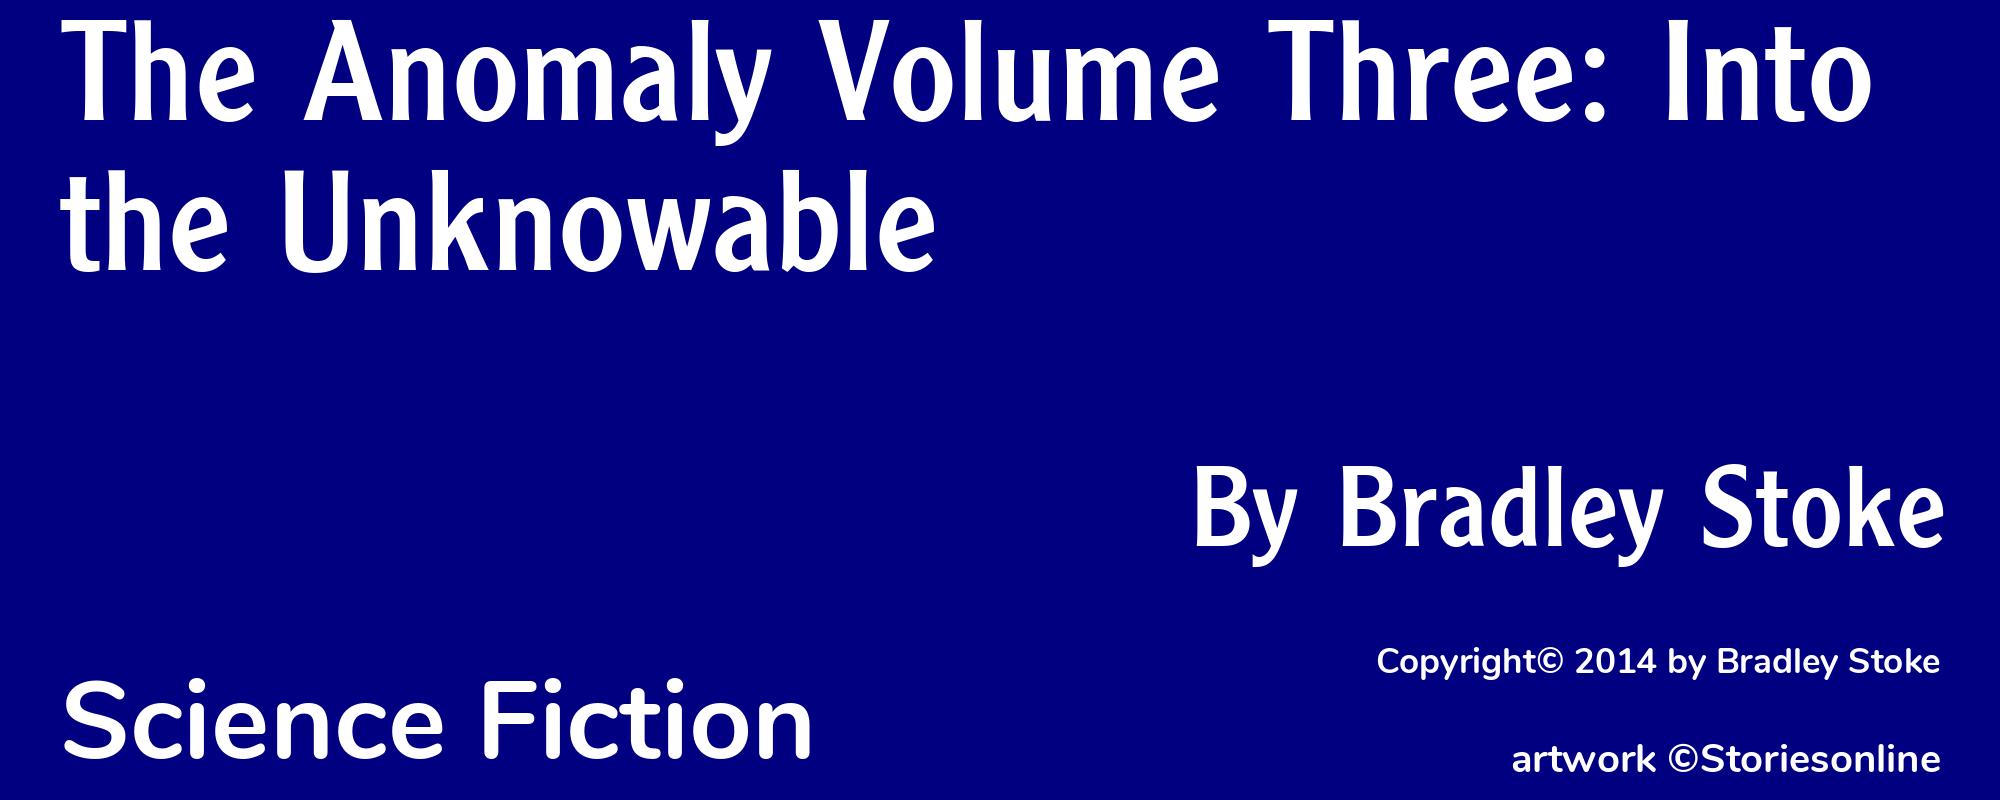 The Anomaly Volume Three: Into the Unknowable - Cover